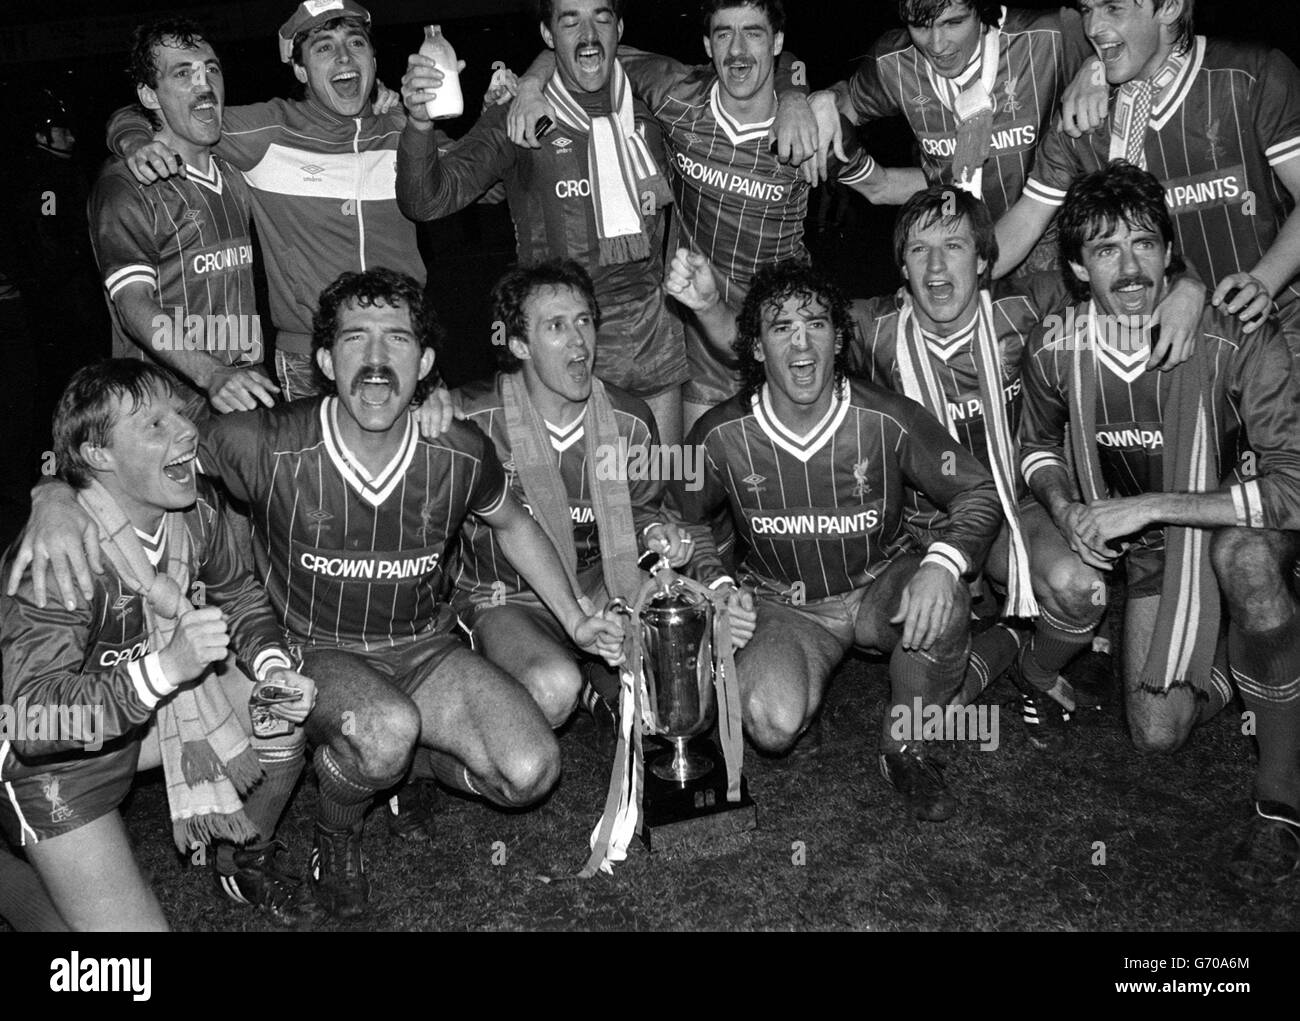 The victorious Liverpool team and a jubilant Graeme Souness (2nd l) with the Milk Cup trophy after they side beat their Merseyside rivals Everton 1-0 in the replay of the Milk Cup final at Maine Road, Manchester. Souness scored the only goal in the 22nd minute to give Liverpool their fourth League Cup win. Stock Photo